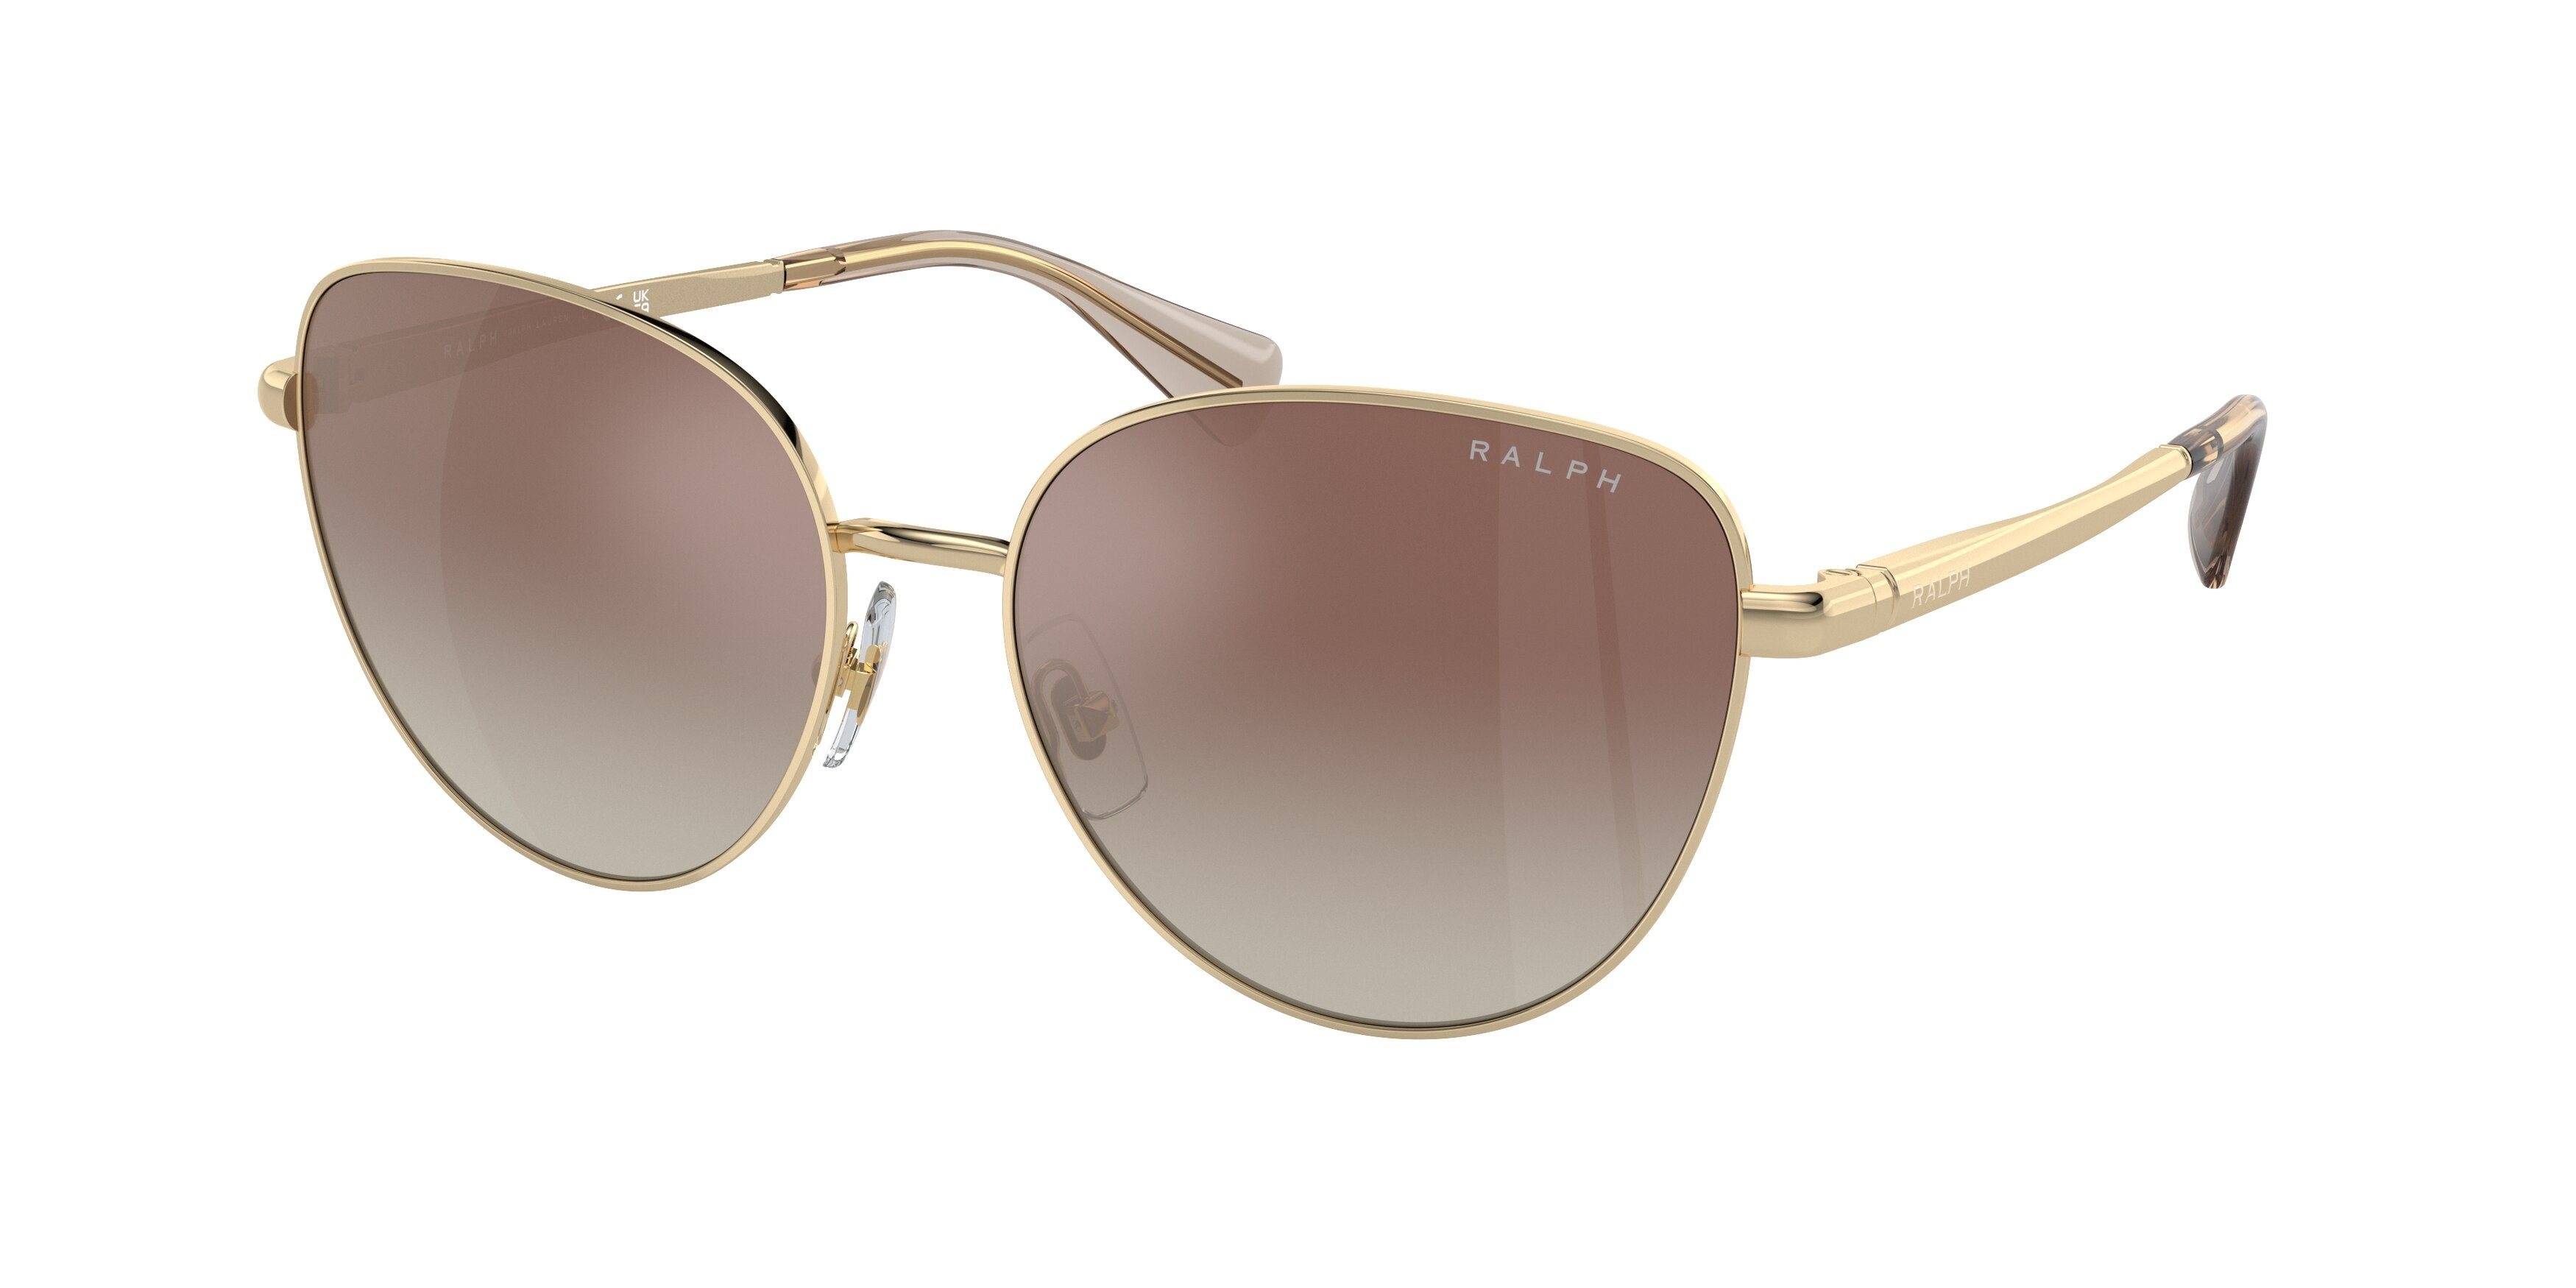 Ralph RA4144 Butterfly Sunglasses  9116B8-Shiny Pale Gold 58-145-16 - Color Map Gold